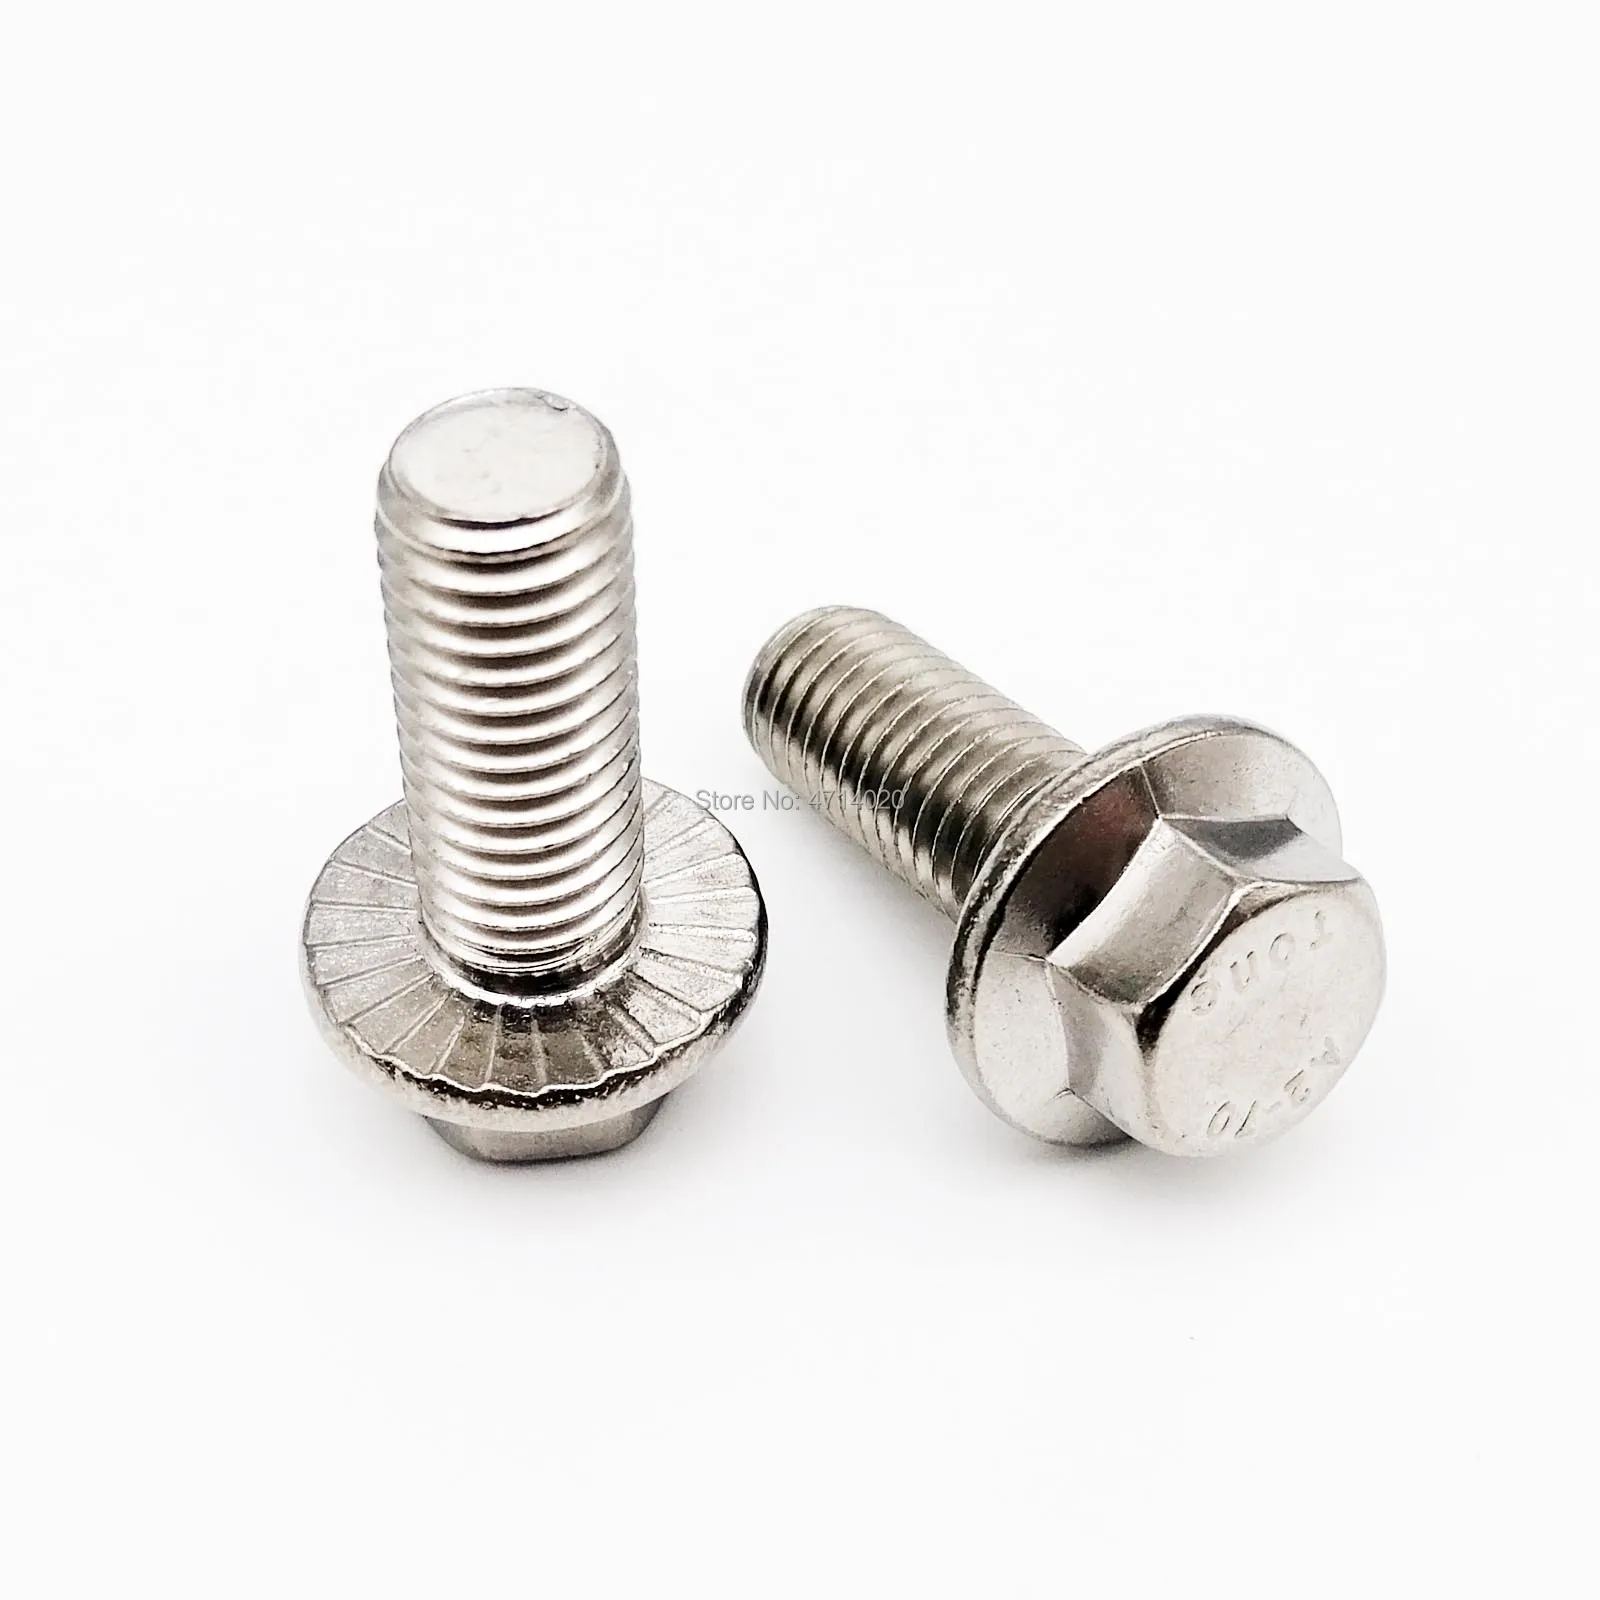 8mm M8 A2 STAINLESS HEXAGONAL FLANGE BOLTS WITH FREE A2 SERRATED FLANGE NUTS * 